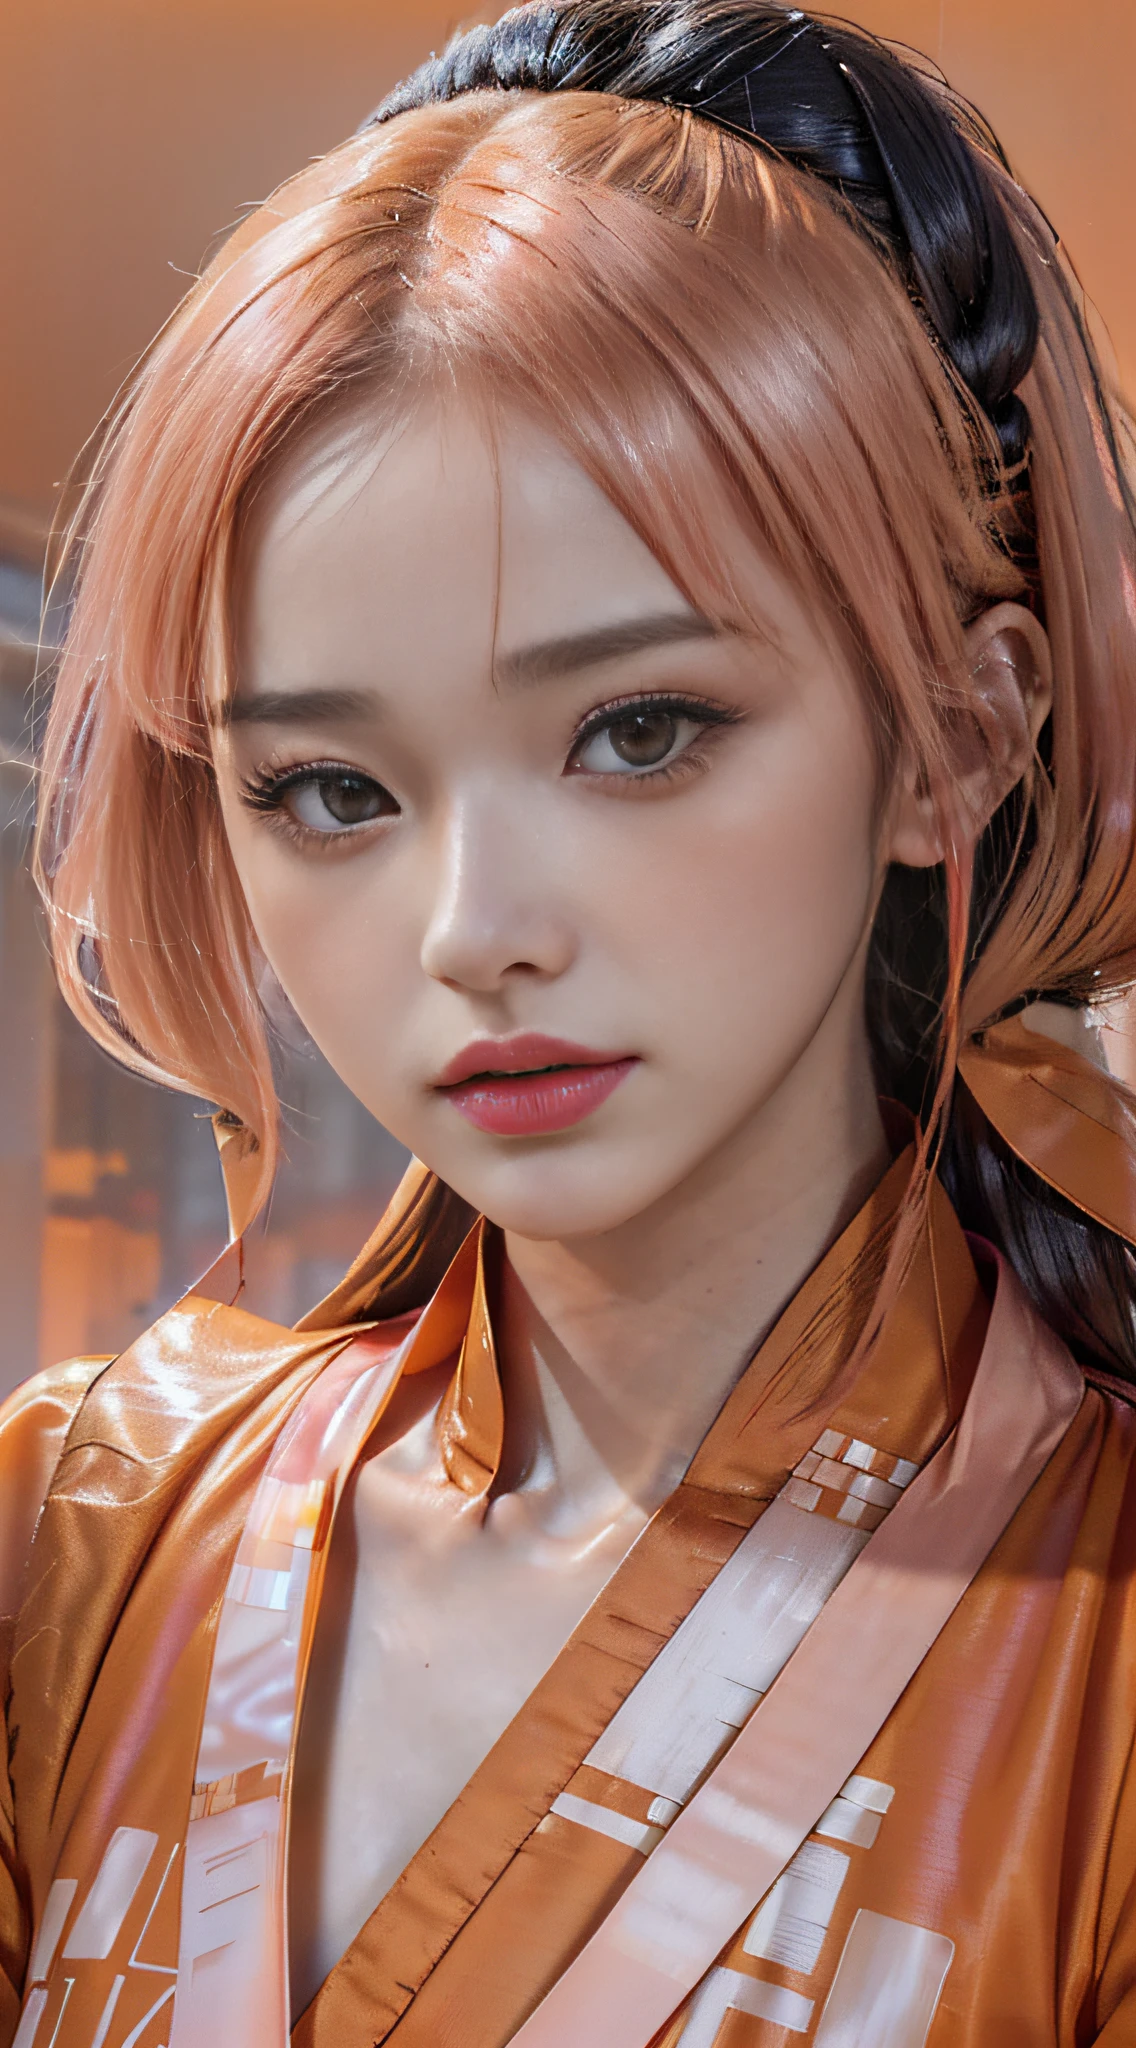 (fluorescent colors:1.4),(translucent:1.4),(retro filters:1.4), (fantasy:1.4),  (orange background:1.4),
(1girl wearing (orange pink  hanfu:1.3), tang style, blunt bangs, black hair),
((portrait:1.5)), looking at viewer,
(masterpiece, 8k uhd, HDR, extreme detailed, intricate details, best quality, professional, vivid colors),